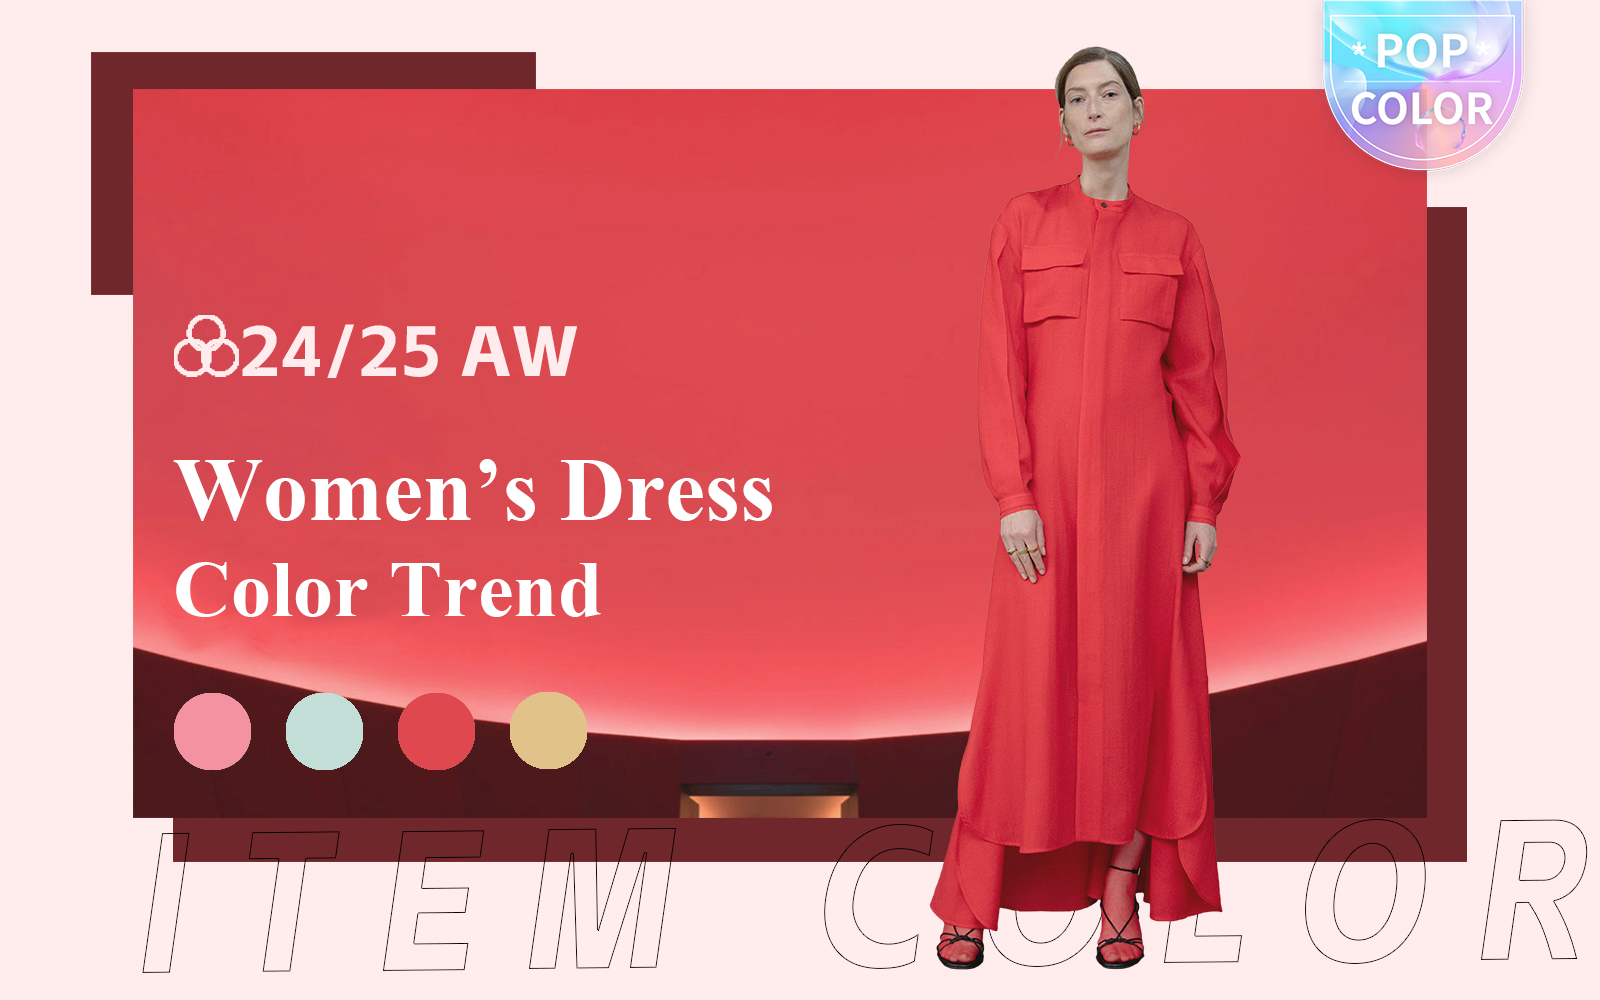 The Color Trend for Women's Dress